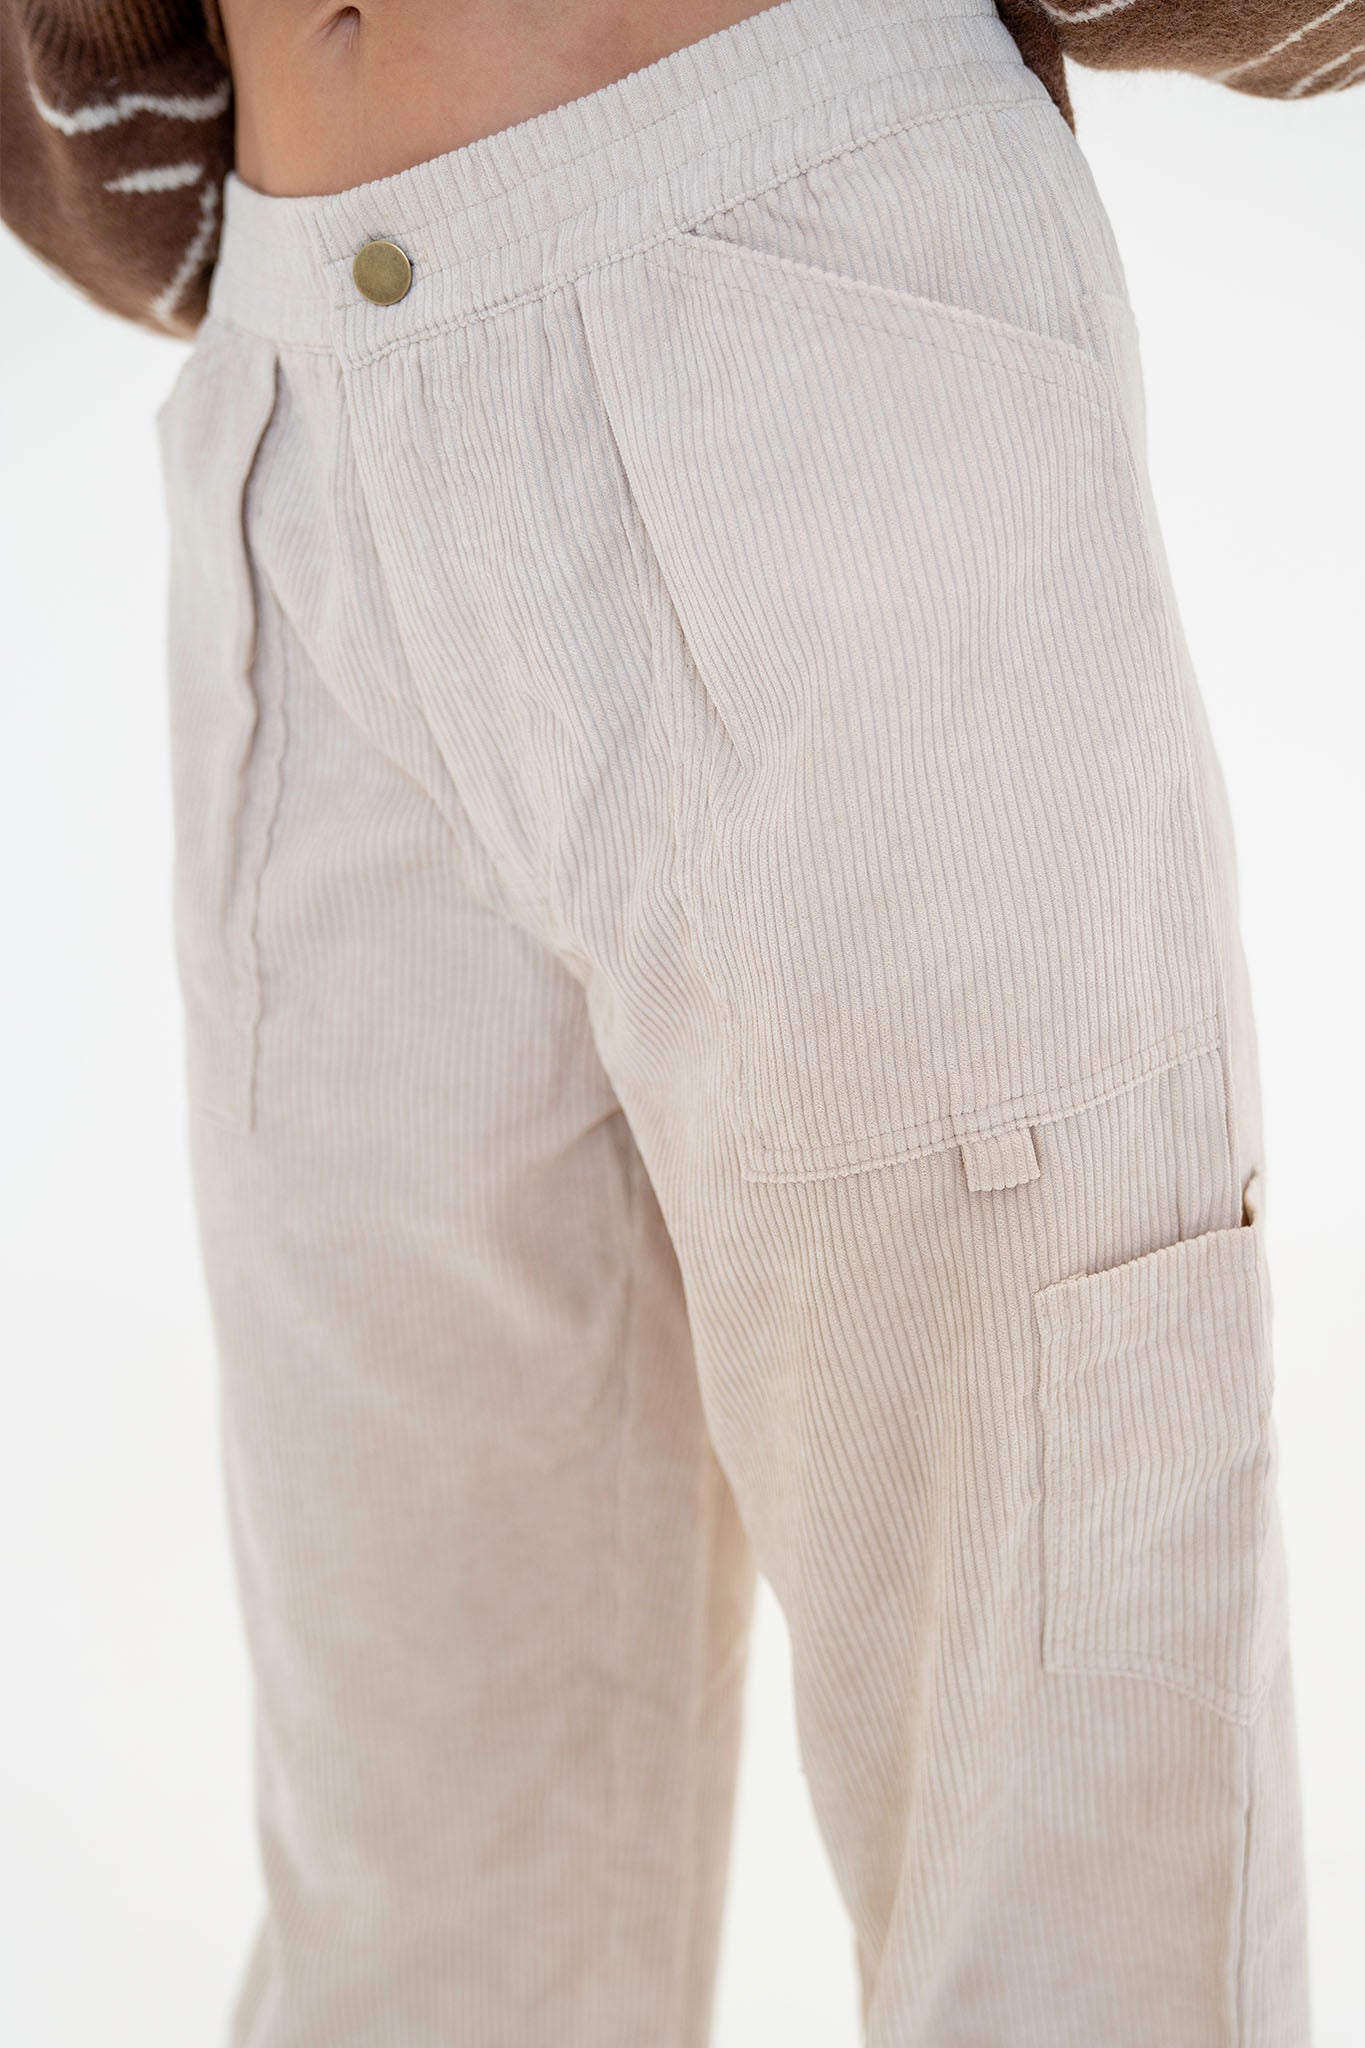 View 5 of Corduroy Cargo Pants, a Pants from Larrea Cove. Detail: .